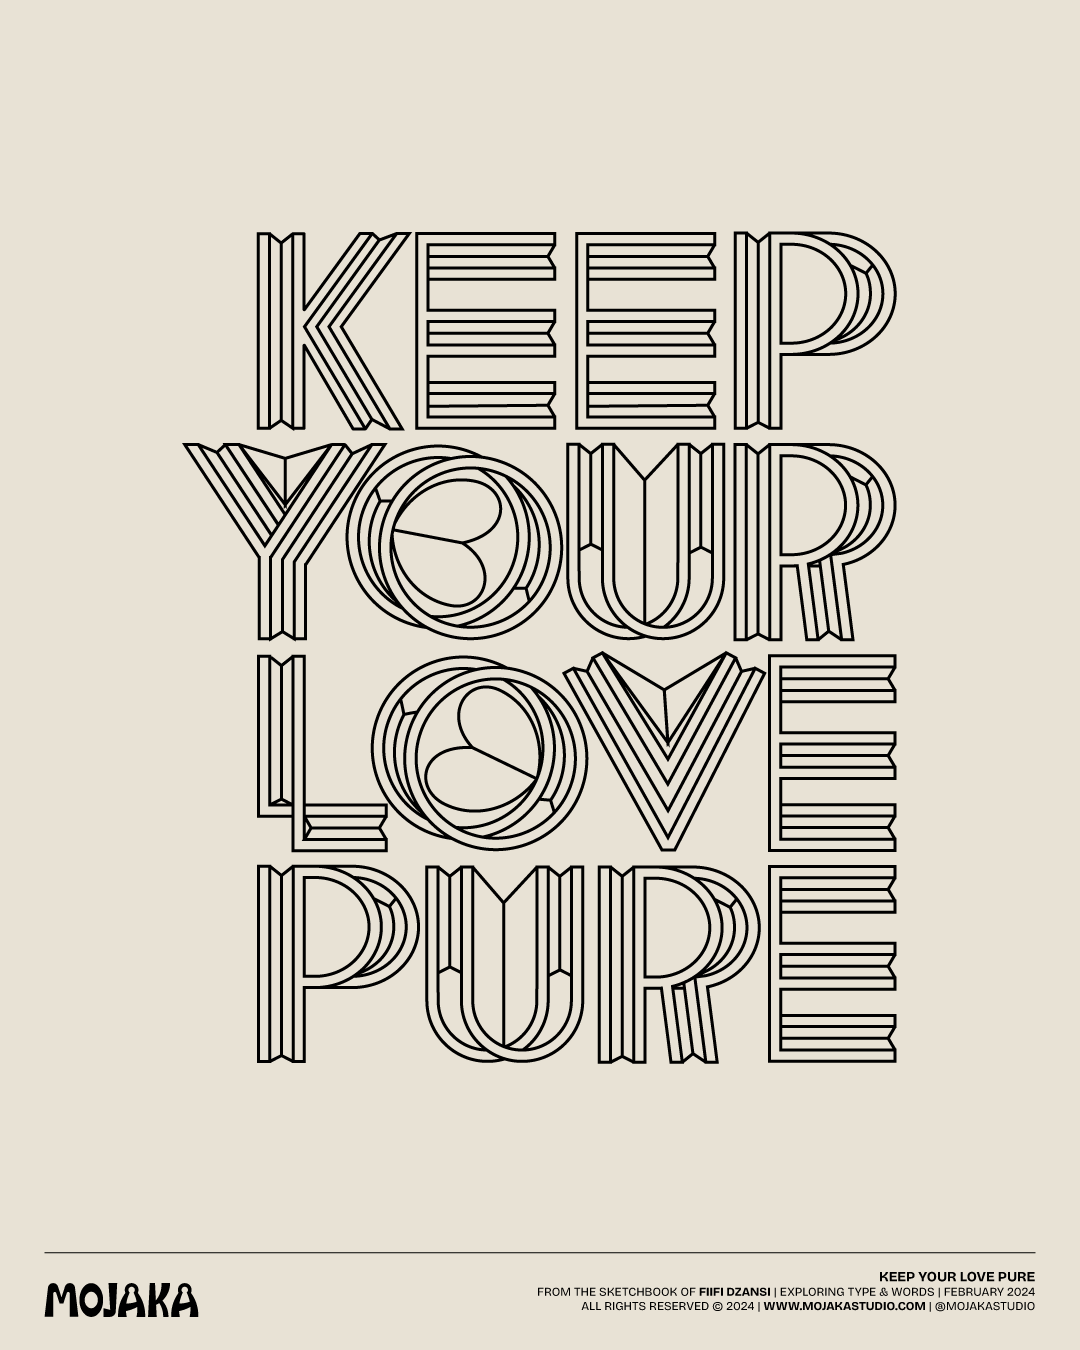 Black outlines of type design that says: Keep your love pure